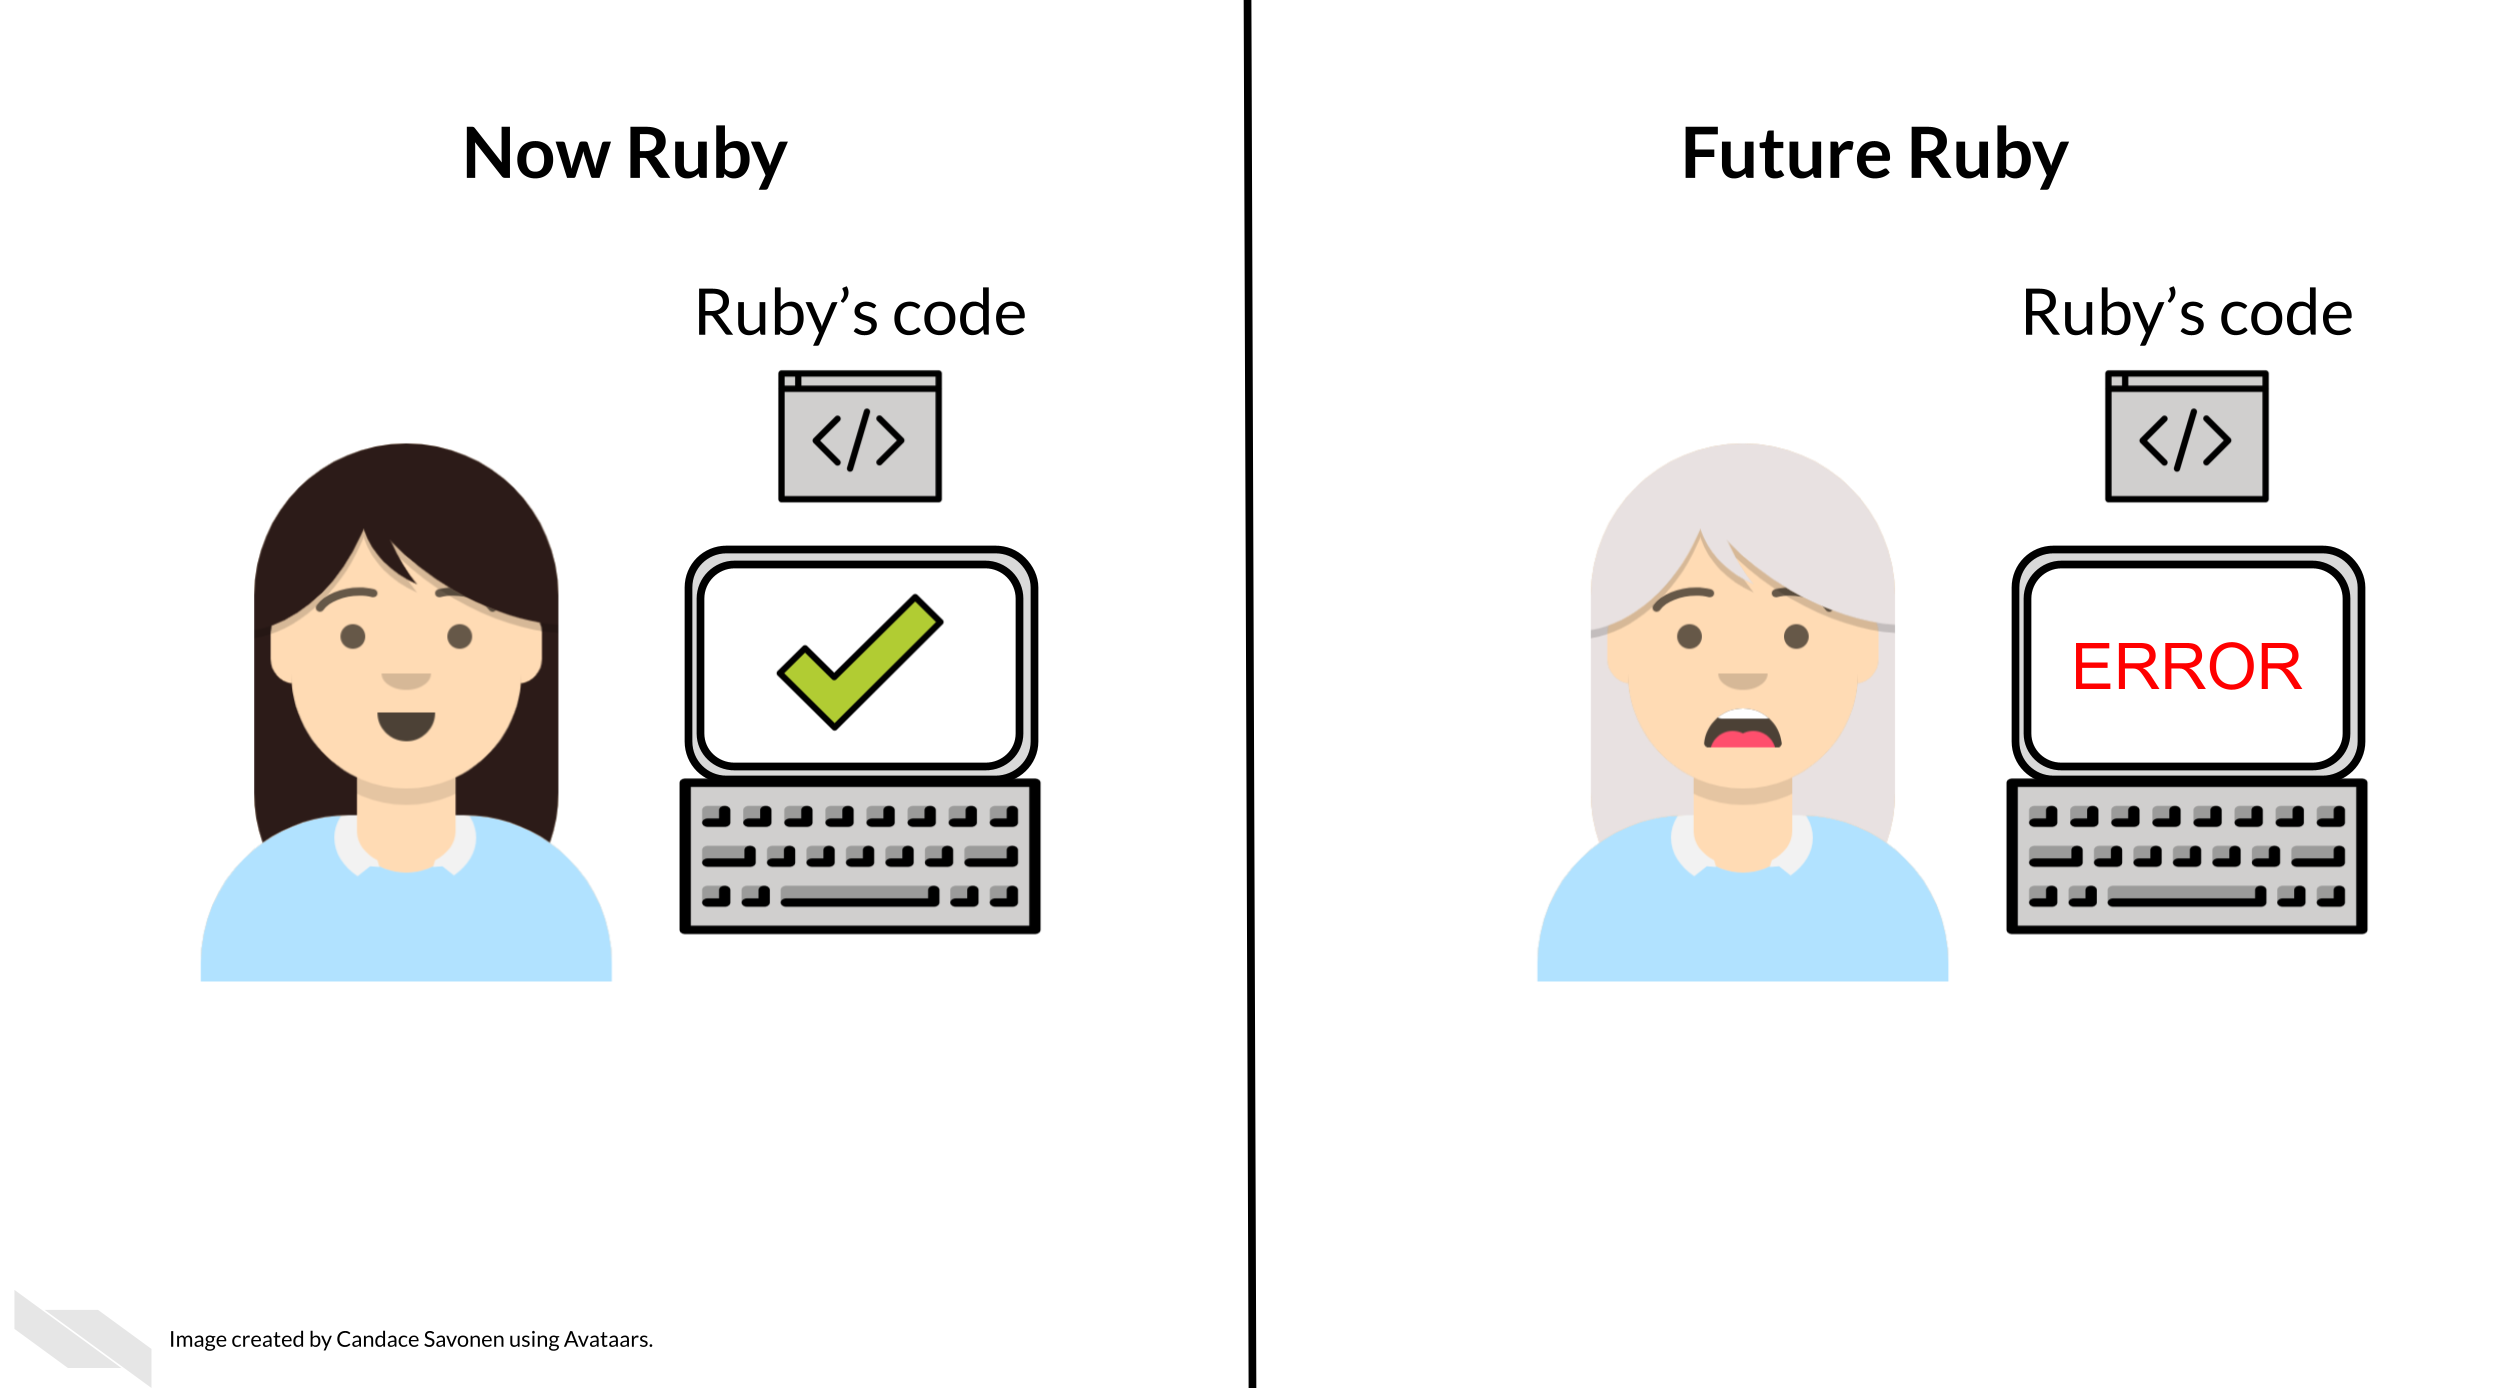 On the left half of the image, text says "Now Ruby" over a picture of a happy white woman with a computer that has a green check mark on the screen. On the right half, the text "Future Ruby" is over a picture of an older white woman with a distressed face, next to a computer that says "ERROR." 